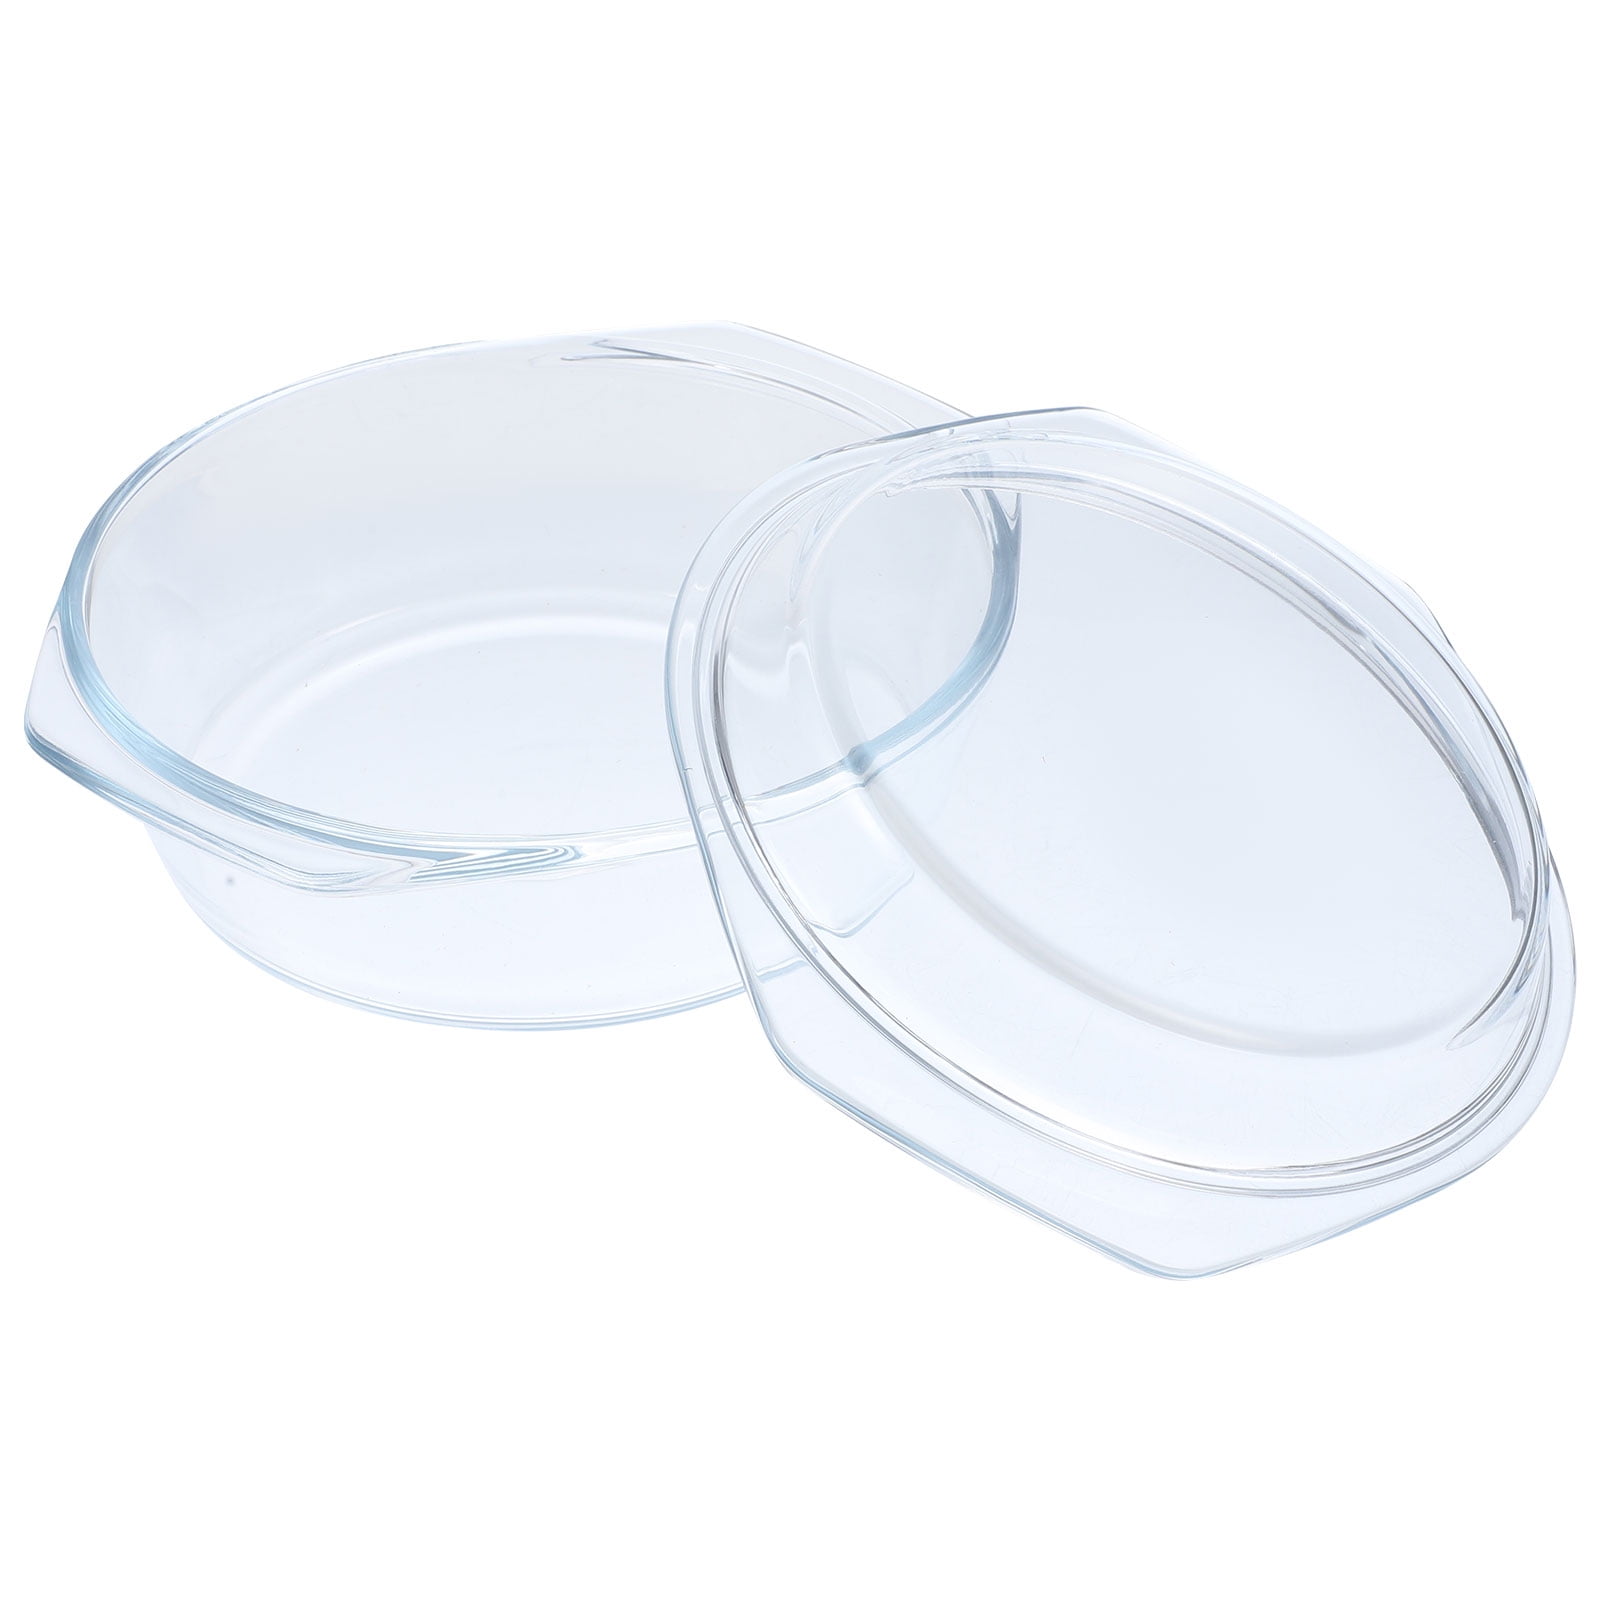 ZYER Clear Round Glass Casserole Dish With Glass Lid Covered Glass Bakeware,Glass  Microwavable Bowls (2.5